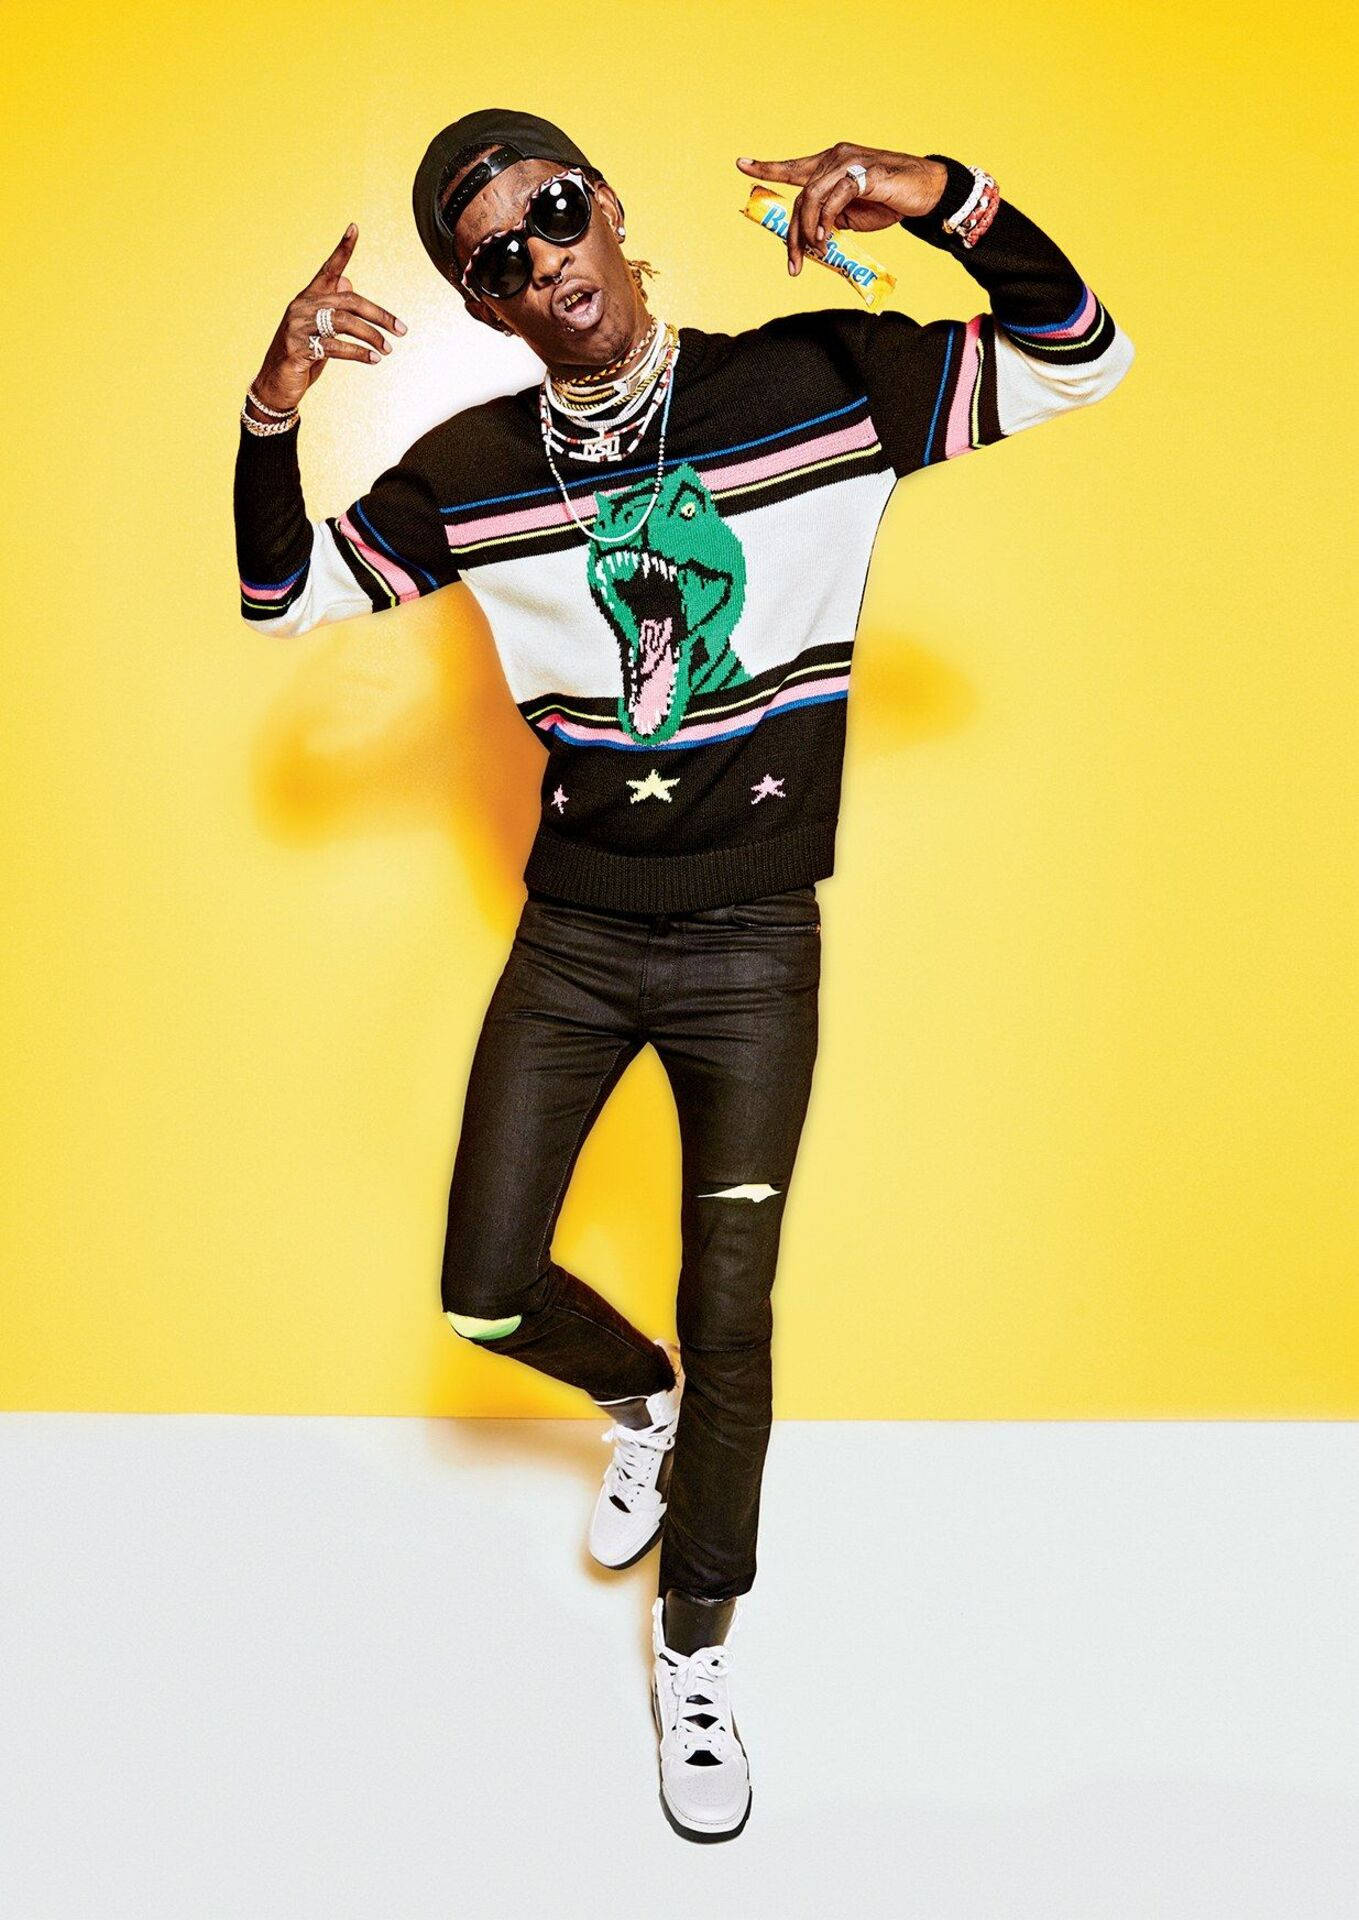 Young Thug 1359X1920 Wallpaper and Background Image